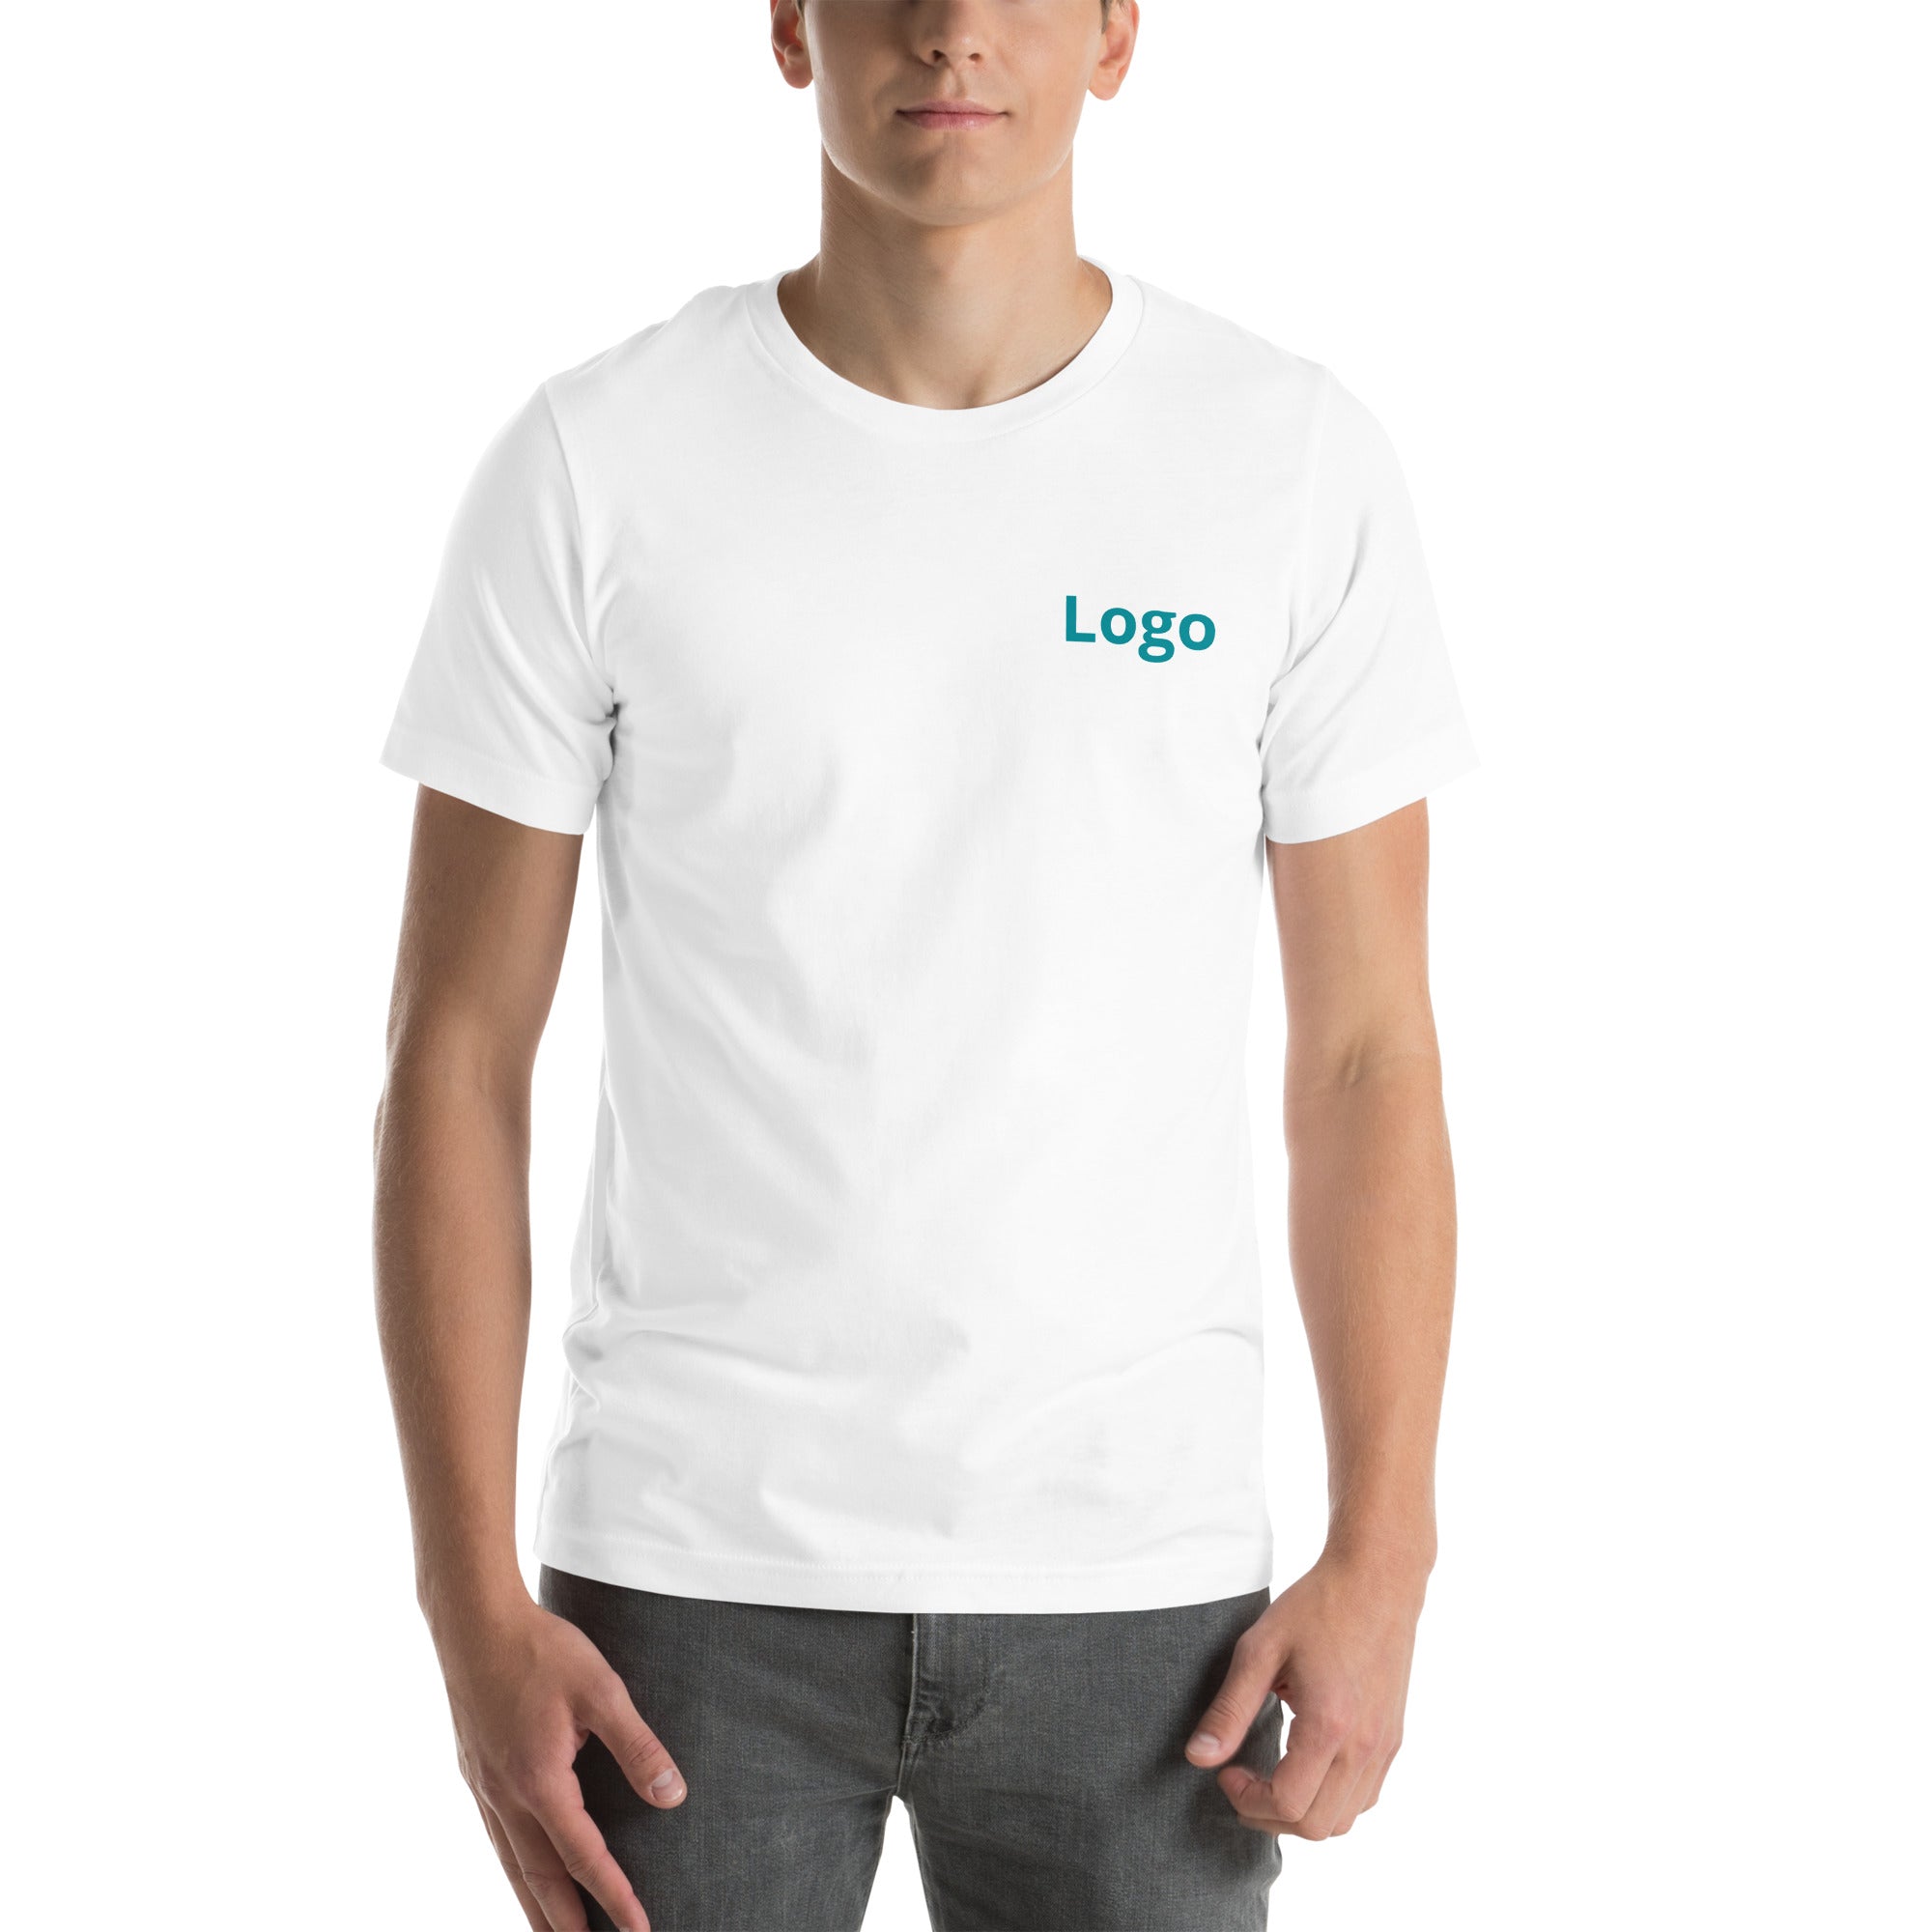 Print Business name and logo in front and back of the t shirt for your team